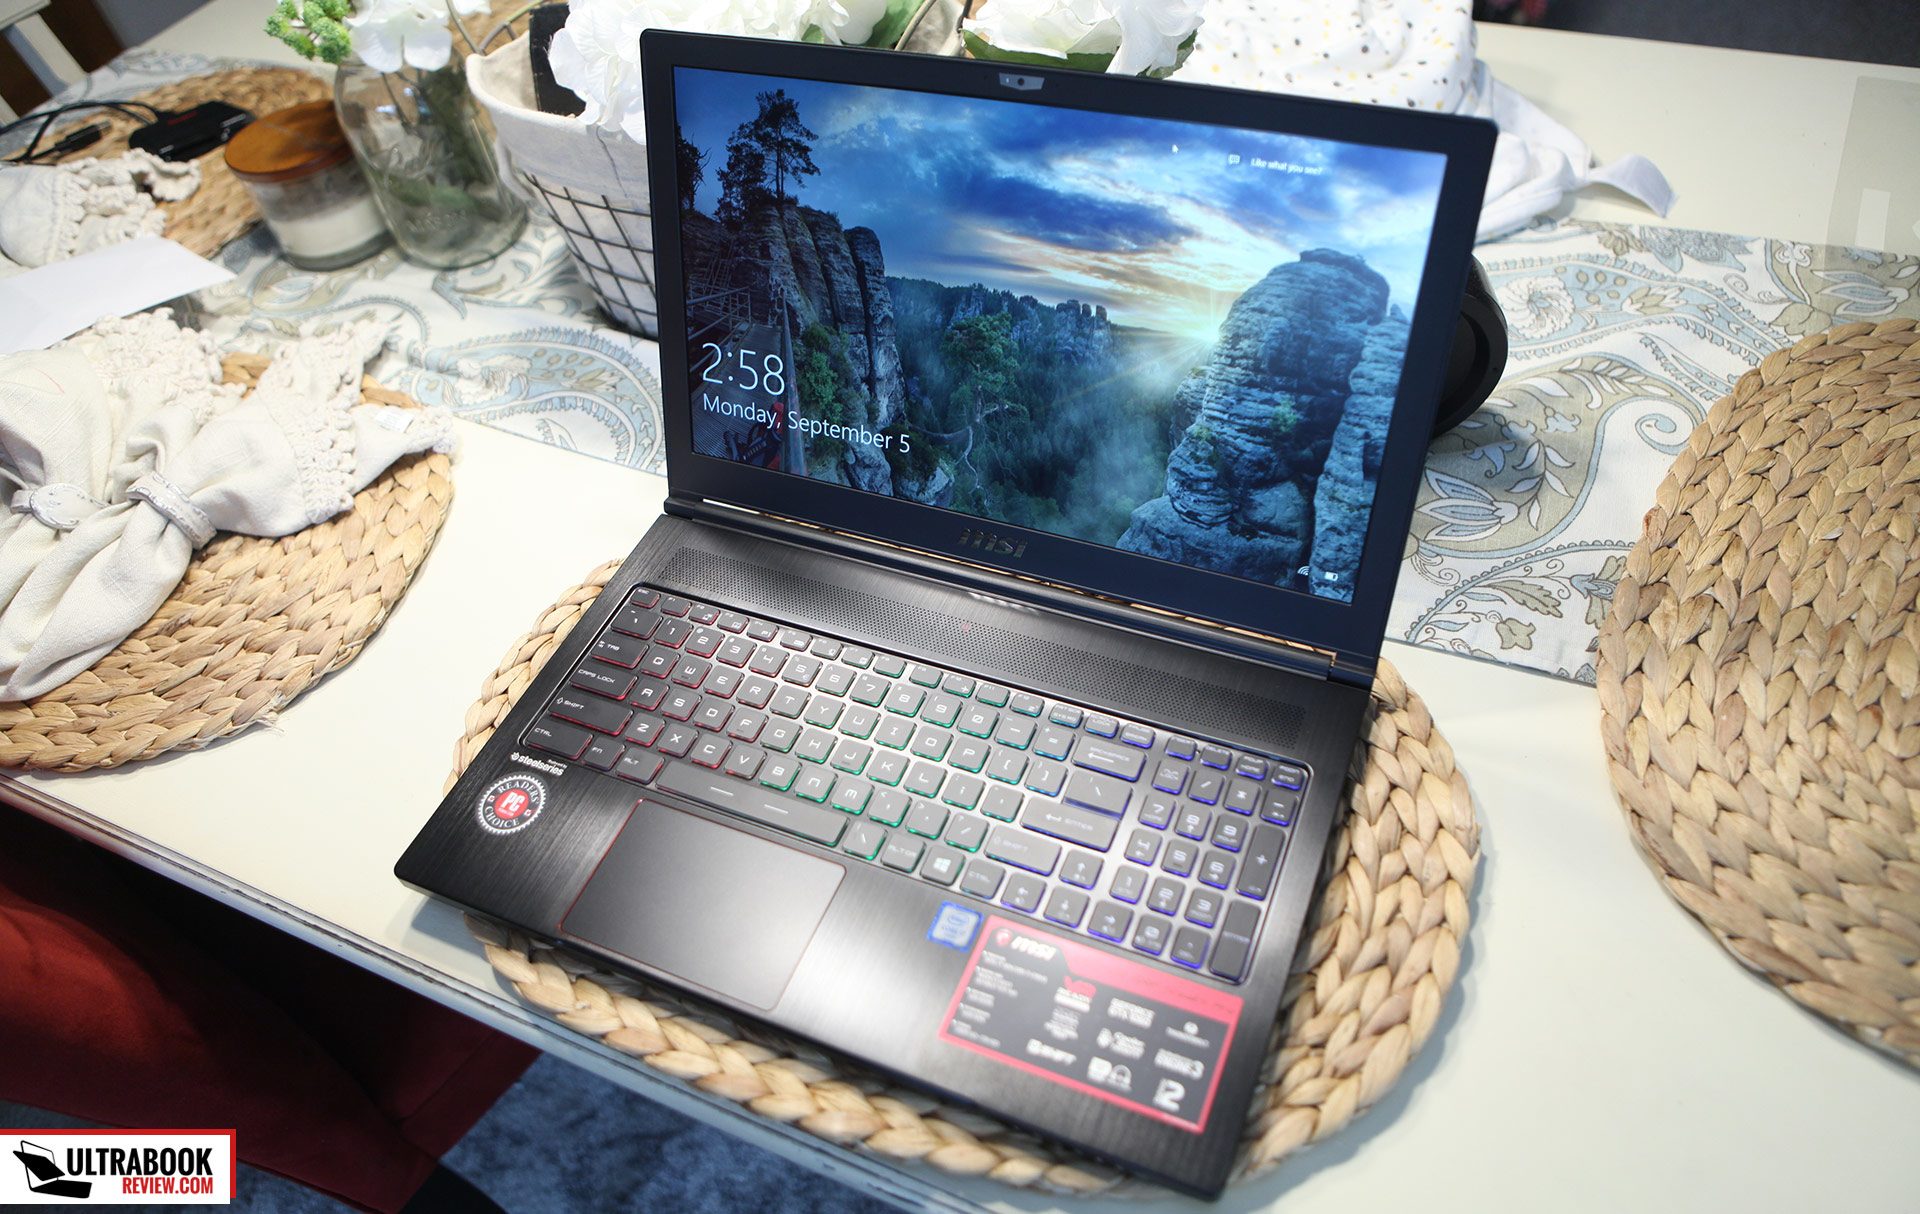 If you want a powerful and ultra-compact 15-inch laptop, the MSI GS63VR must be on your list